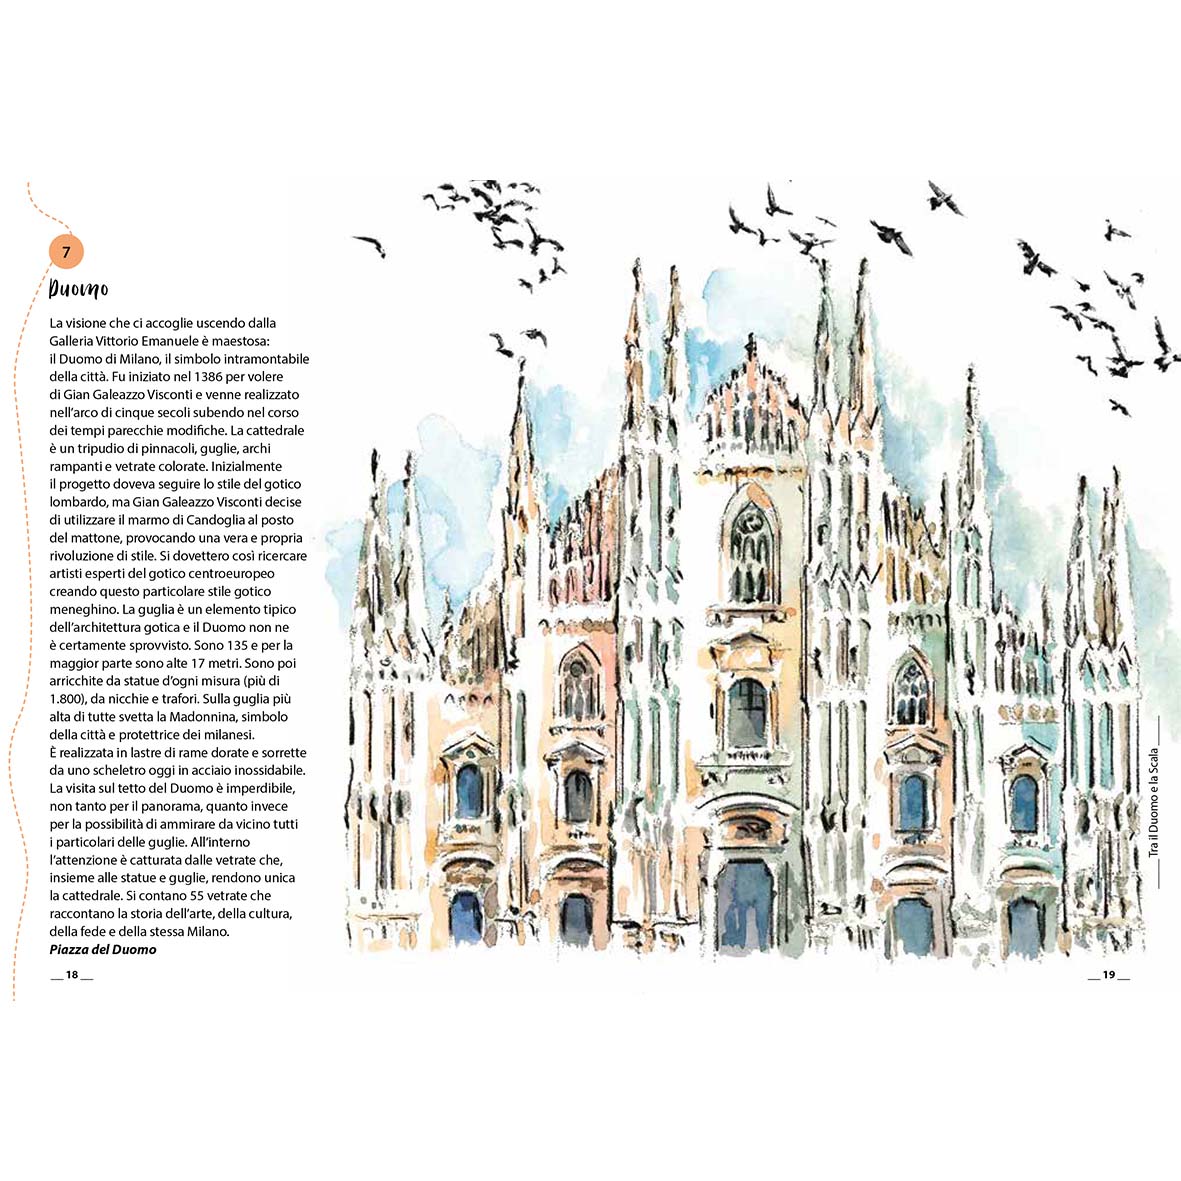 Milan on foot - Curiosities and small discoveries